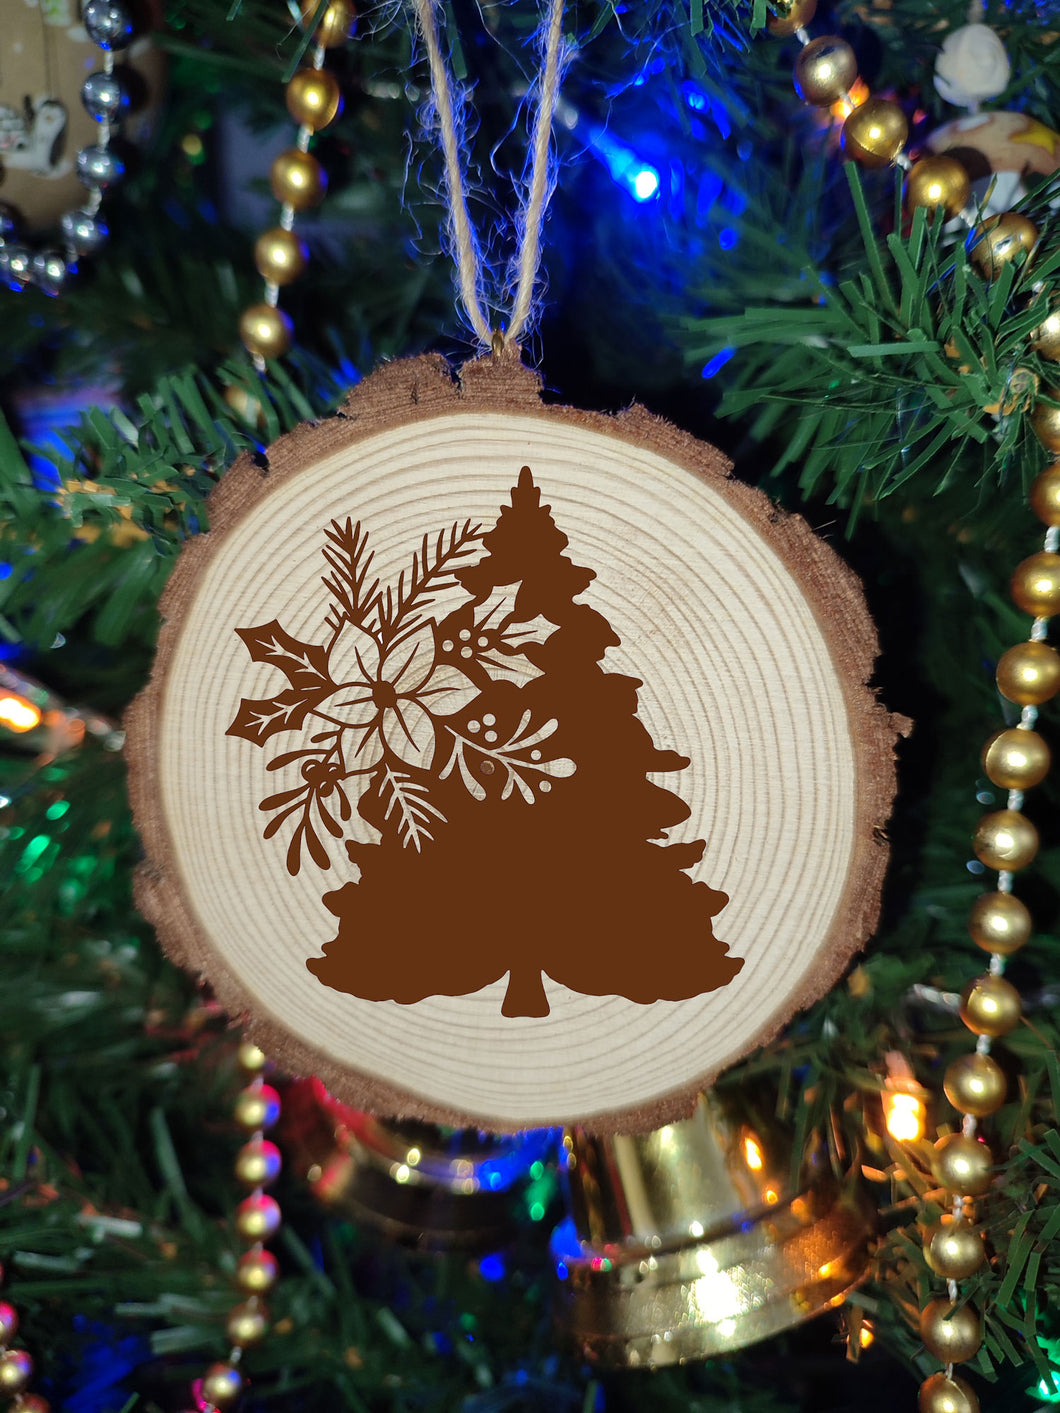 Merry Christmas Tree Natural Wooden Rustic Festive Ball Bauble Engraved Gift Present Keepsake / S54